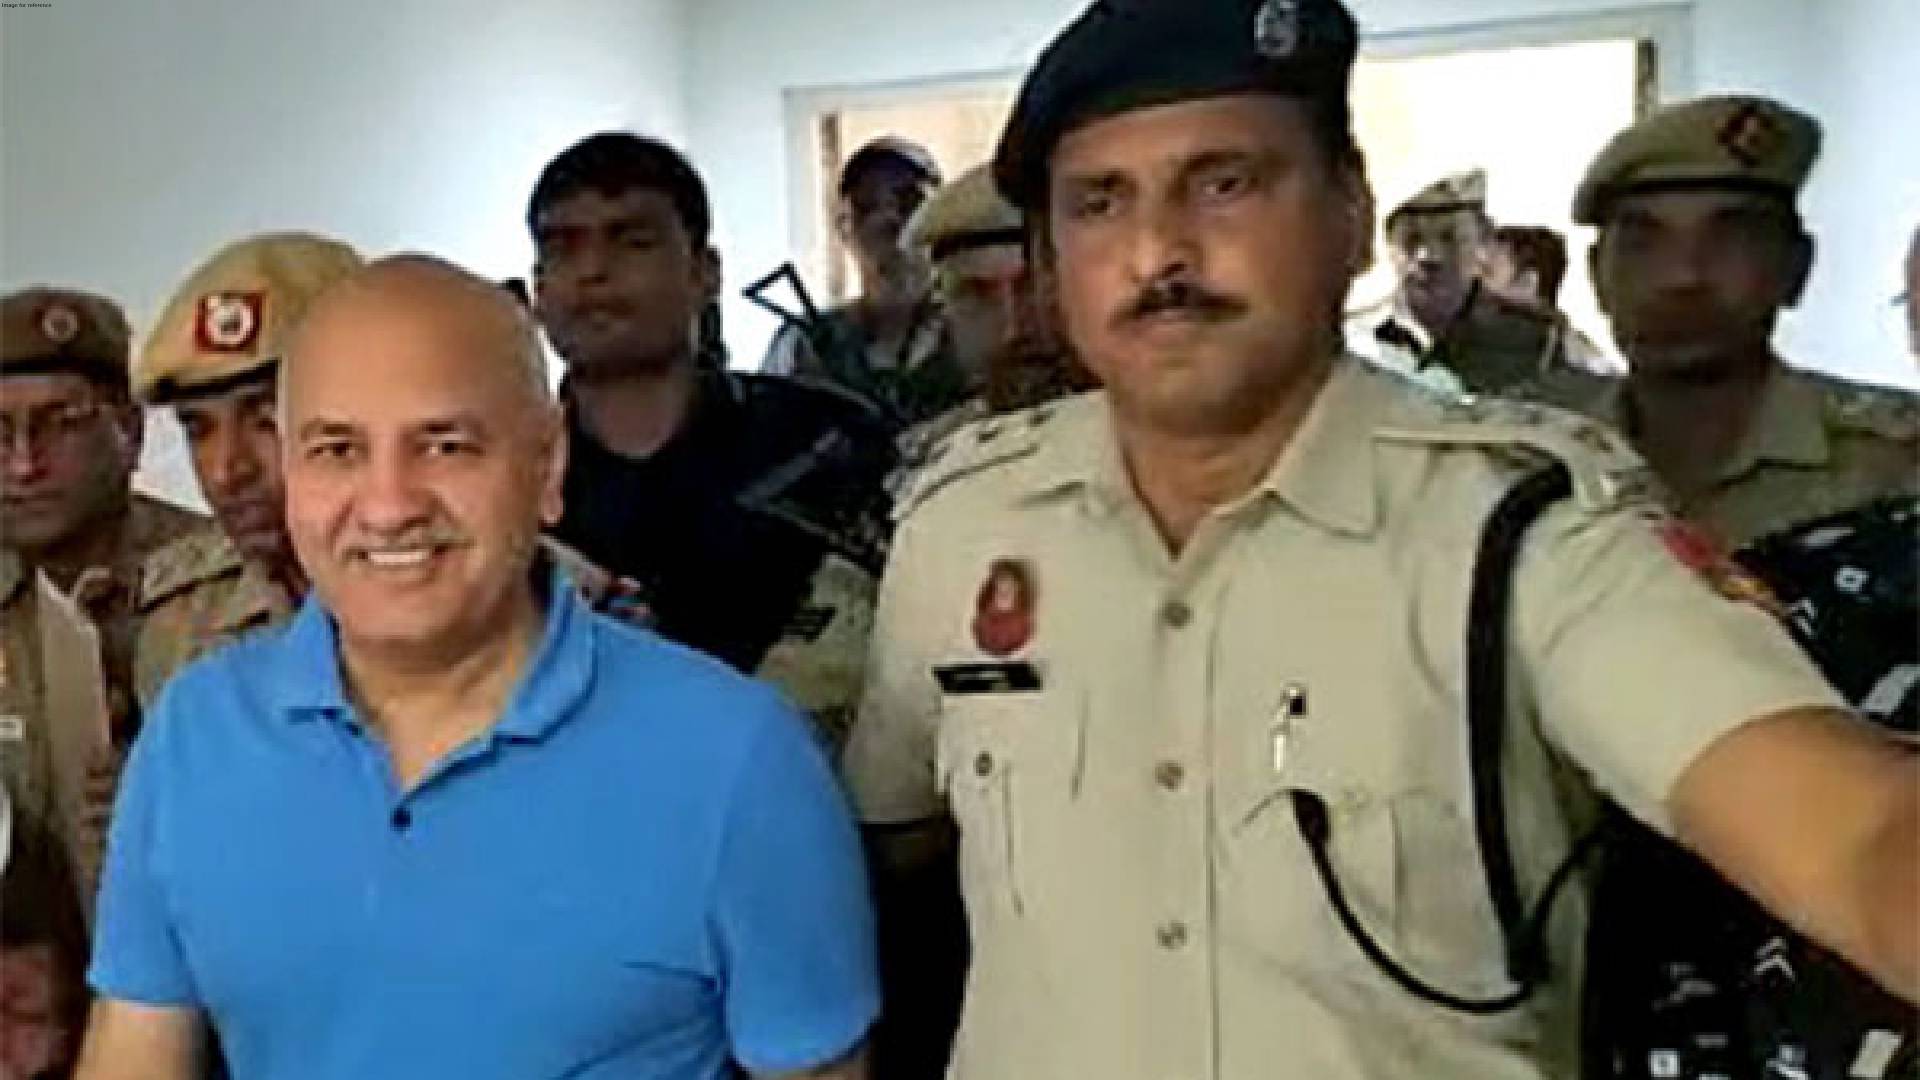 Delhi liquor policy case: Manish Sisodia's curative petition mentioned in SC for early hearing